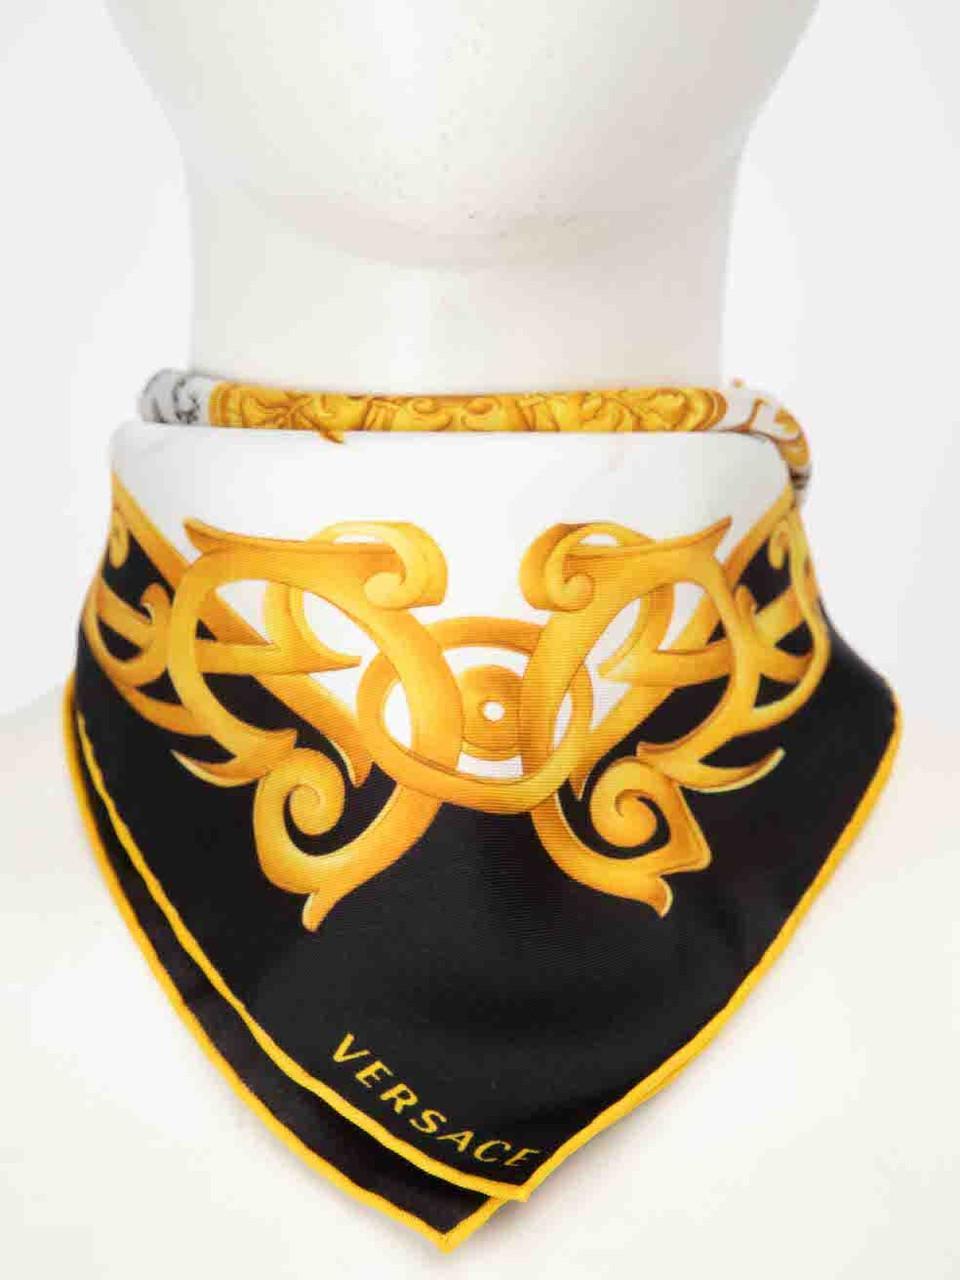 CONDITION is New with tags on this brand new Versace designer item. This item comes with original packaging.
 
 
 
 Details
 
 
 Model: IFO4501
 
 Season: FW23
 
 Multicolour- white, black, gold
 
 Silk
 
 Bandana
 
 Barocco print
 
 
 
 
 
 Made in